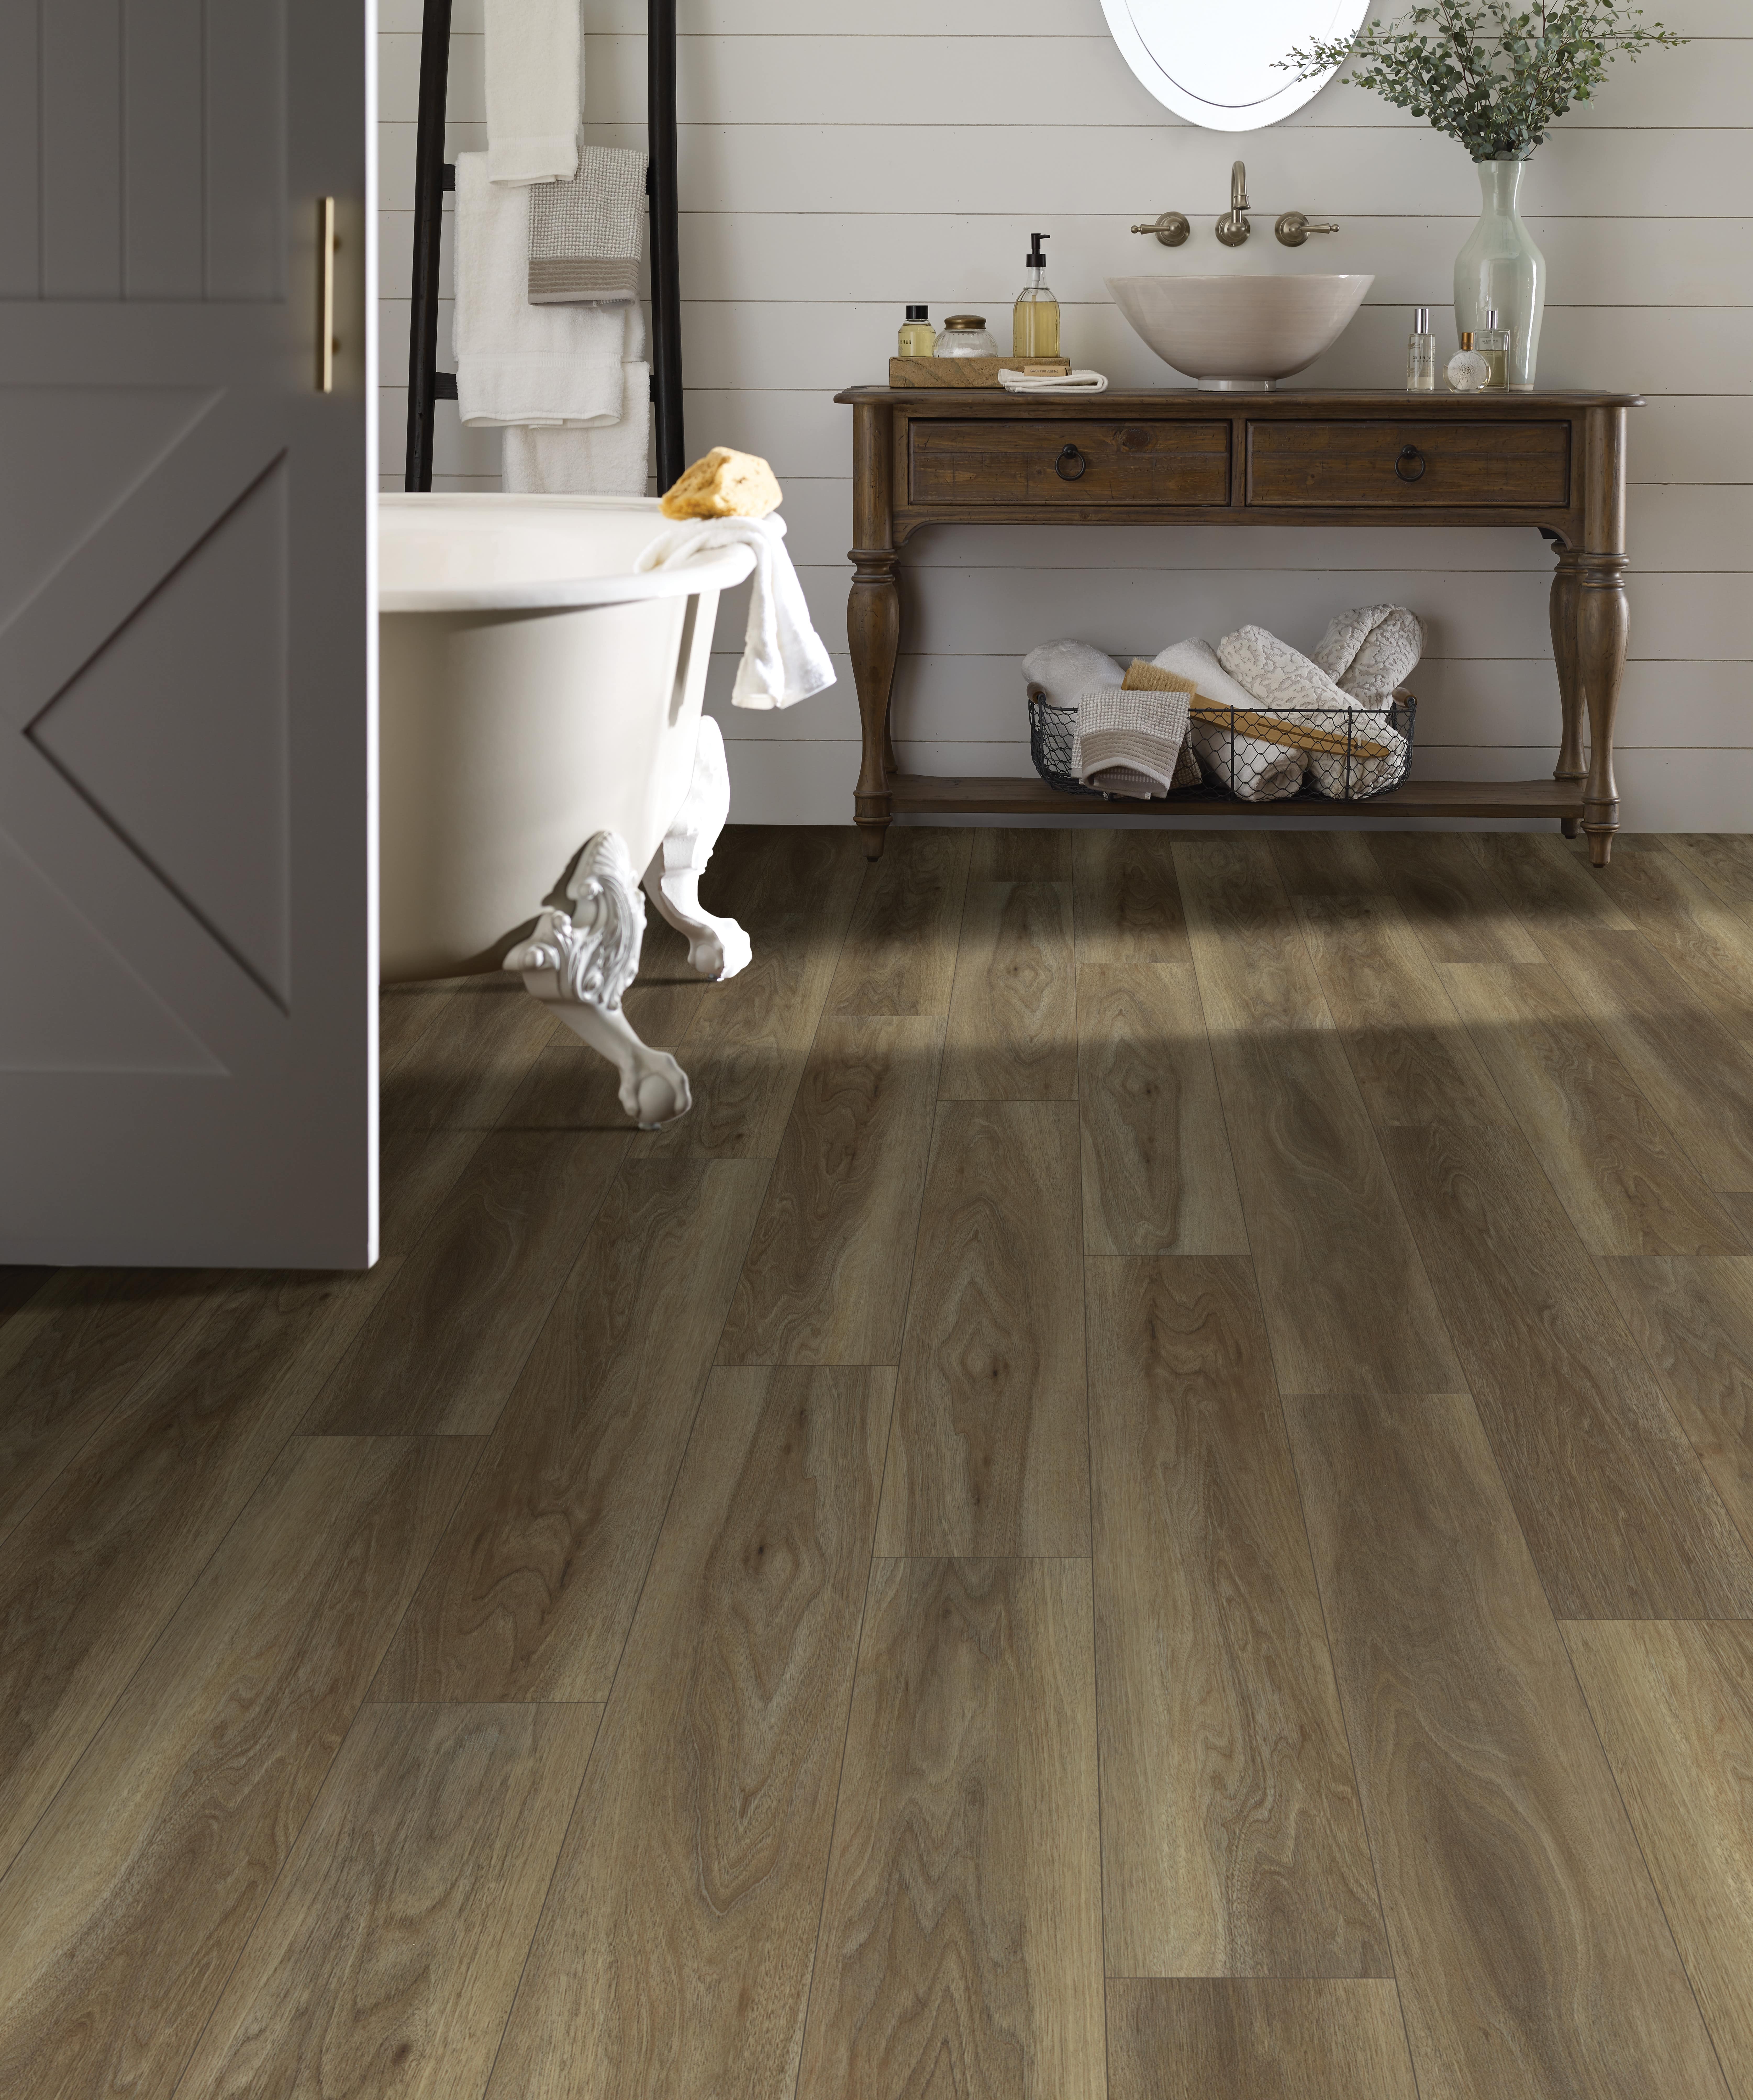 Wood Floor Bathrooms How To Do Them, How To Put Laminate Flooring In Bathroom